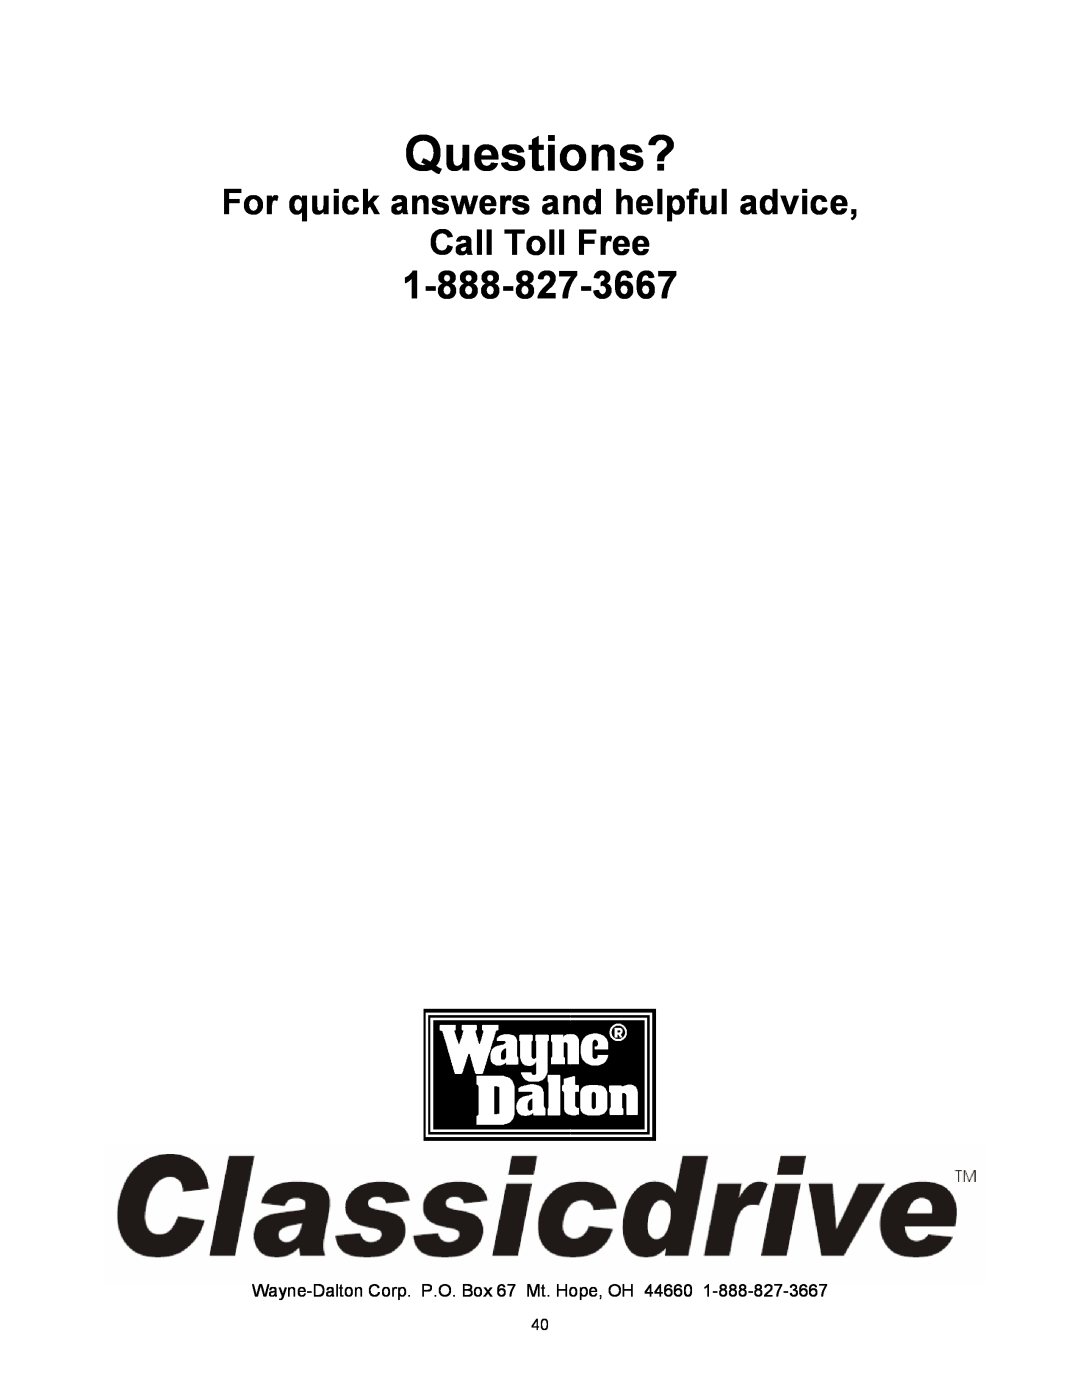 Wayne 3014, 3514, 3018DLX user manual For quick answers and helpful advice, Call Toll Free, Questions? 